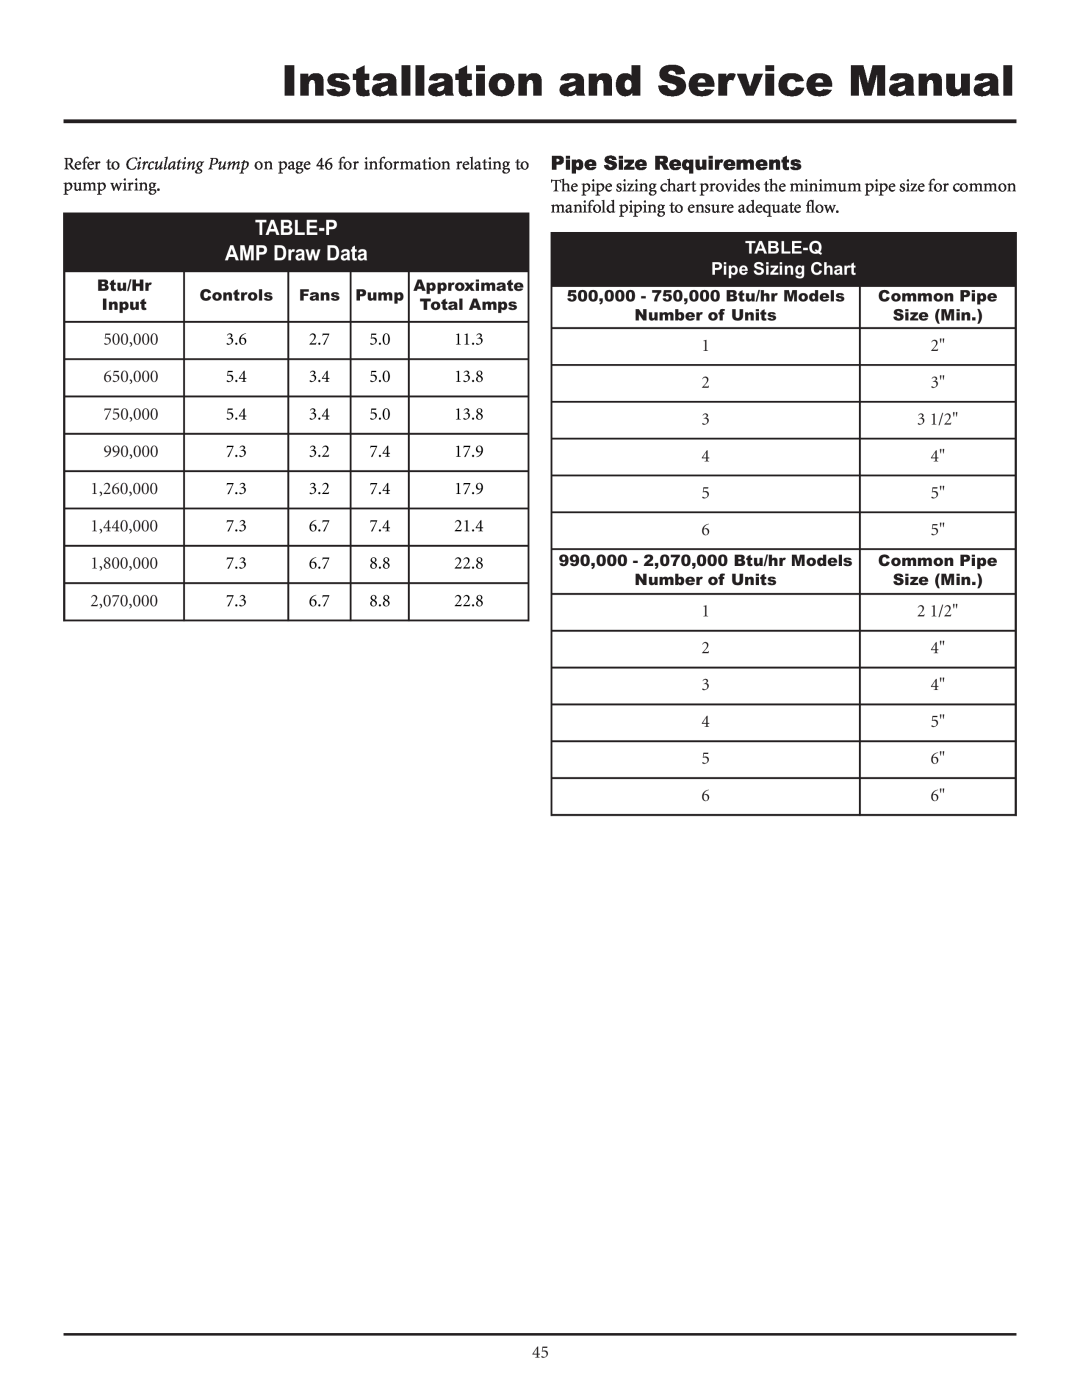 Lochinvar F0600187510 service manual TABLE-P AMP Draw Data, Pipe Size Requirements, TABLE-Q Pipe Sizing Chart 